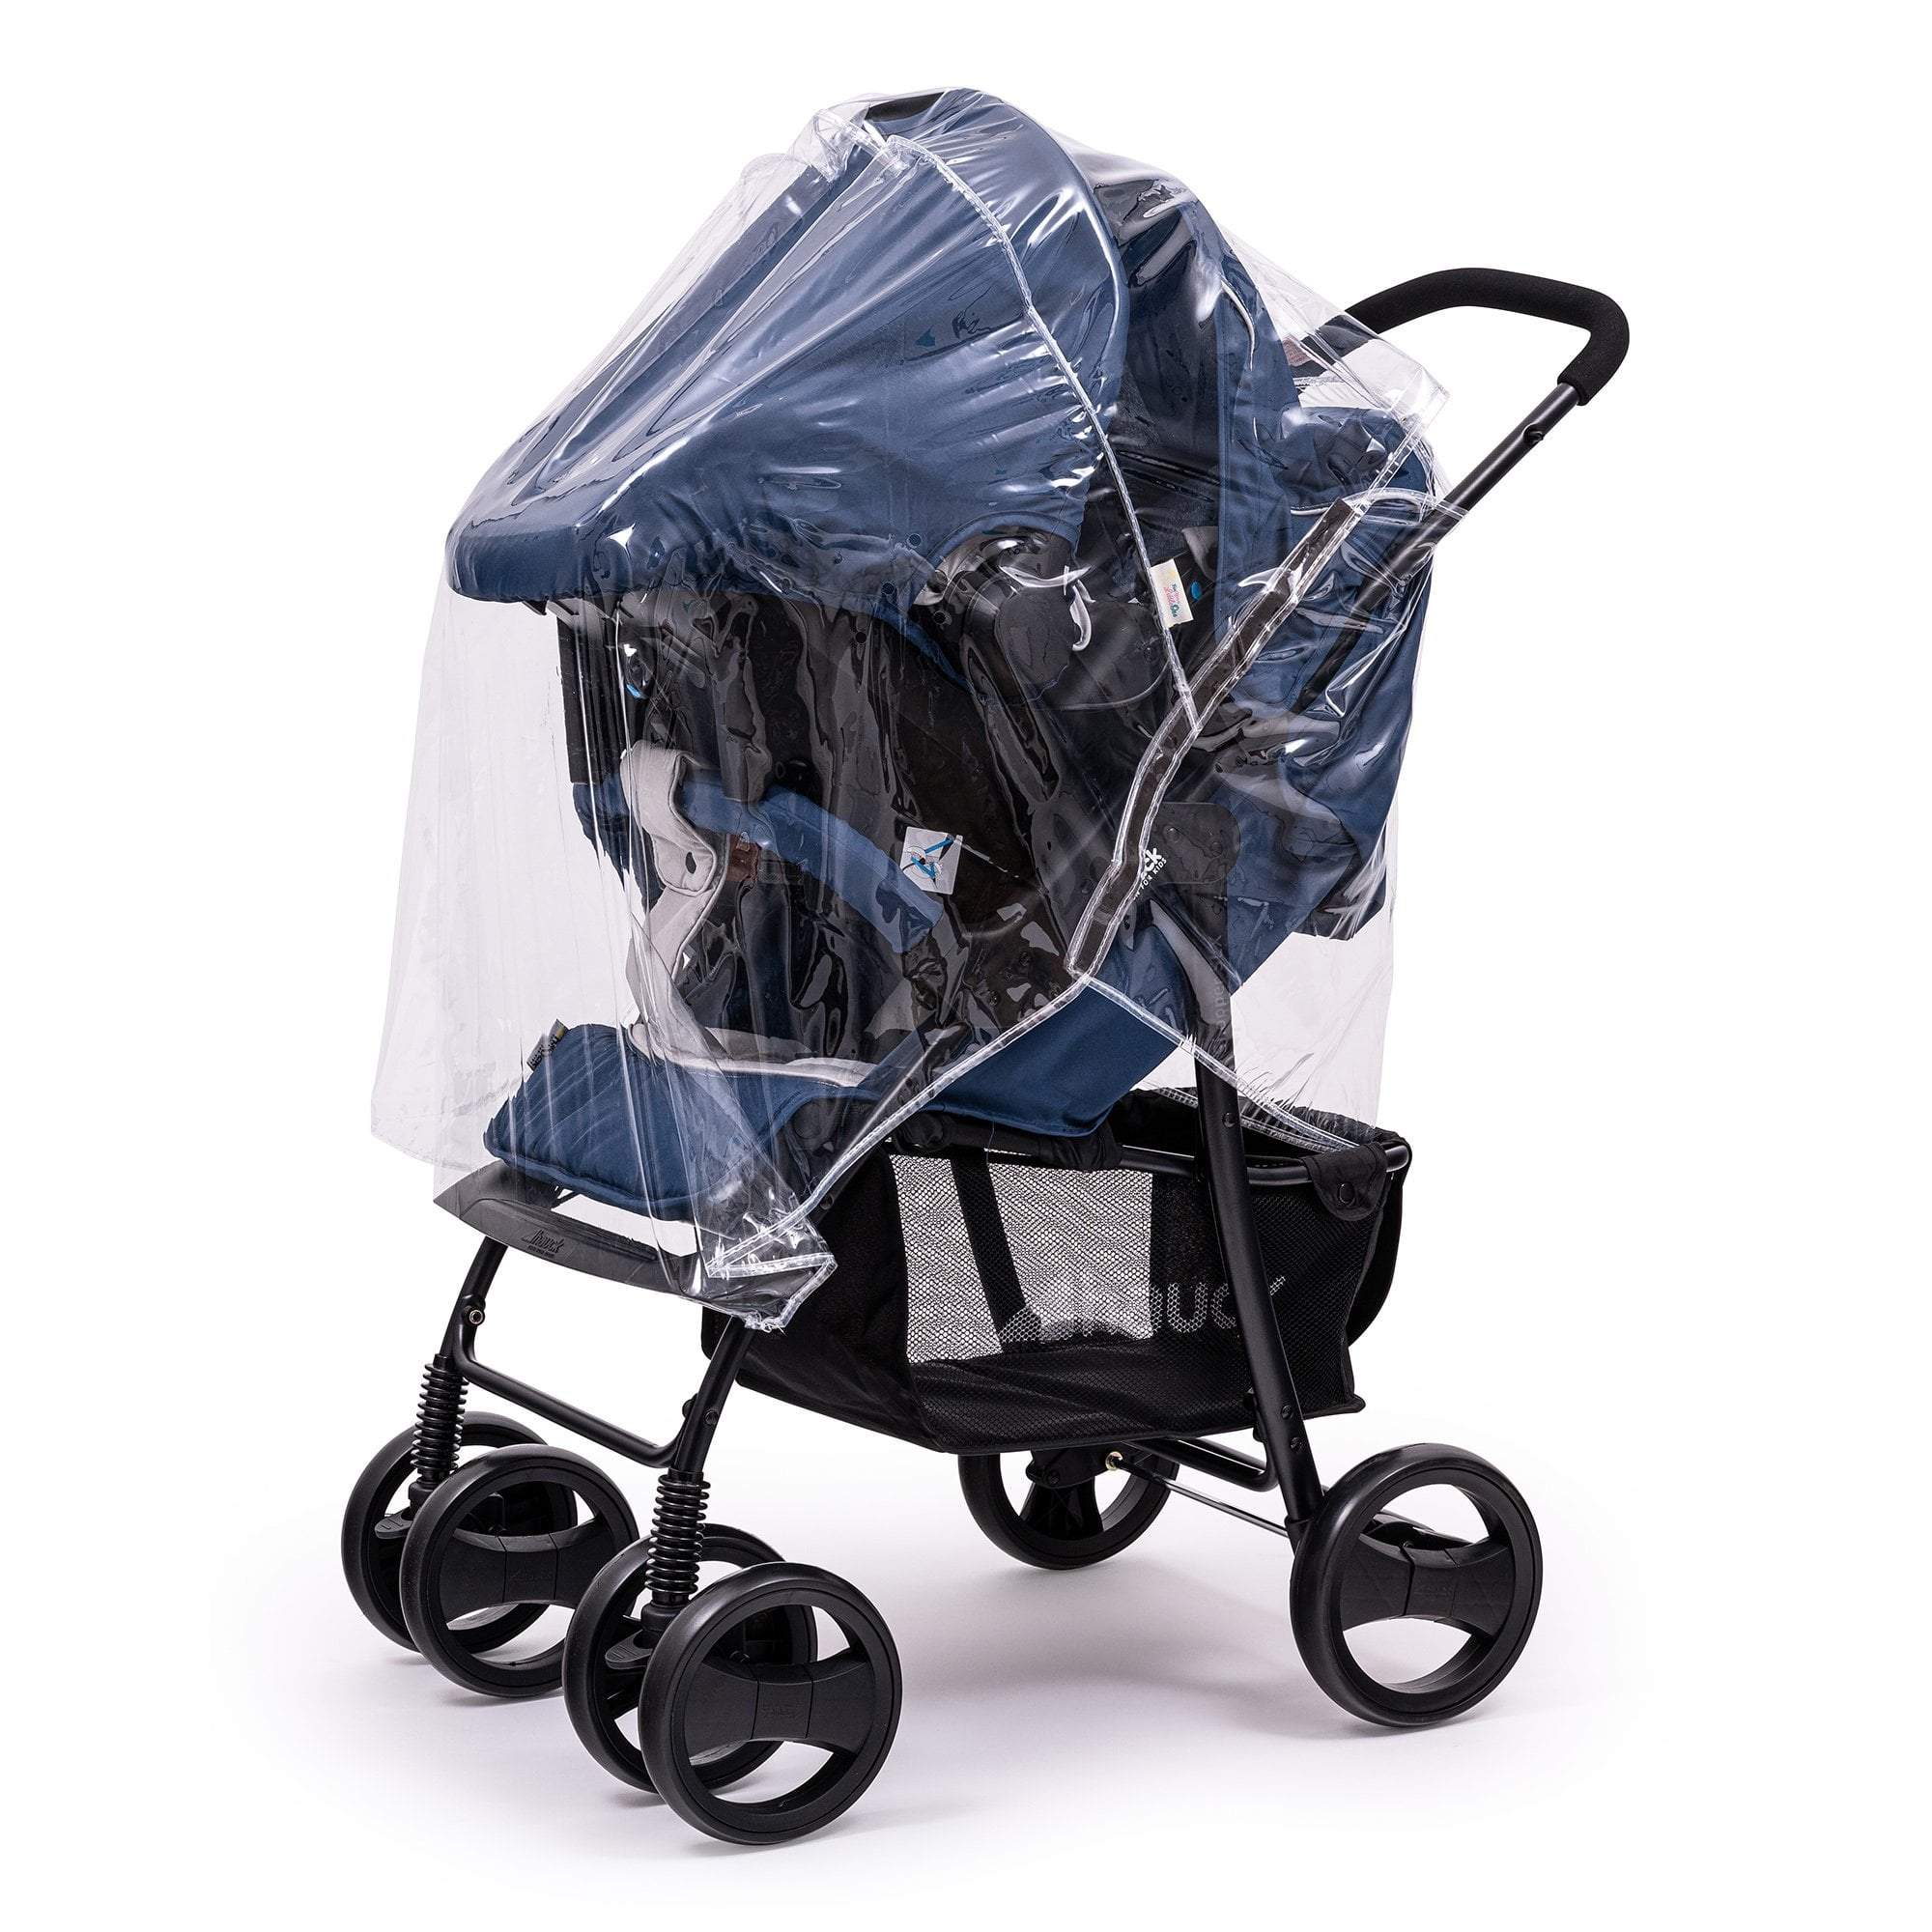 Travel System Raincover Compatible with BabyCare - Fits All Models - For Your Little One